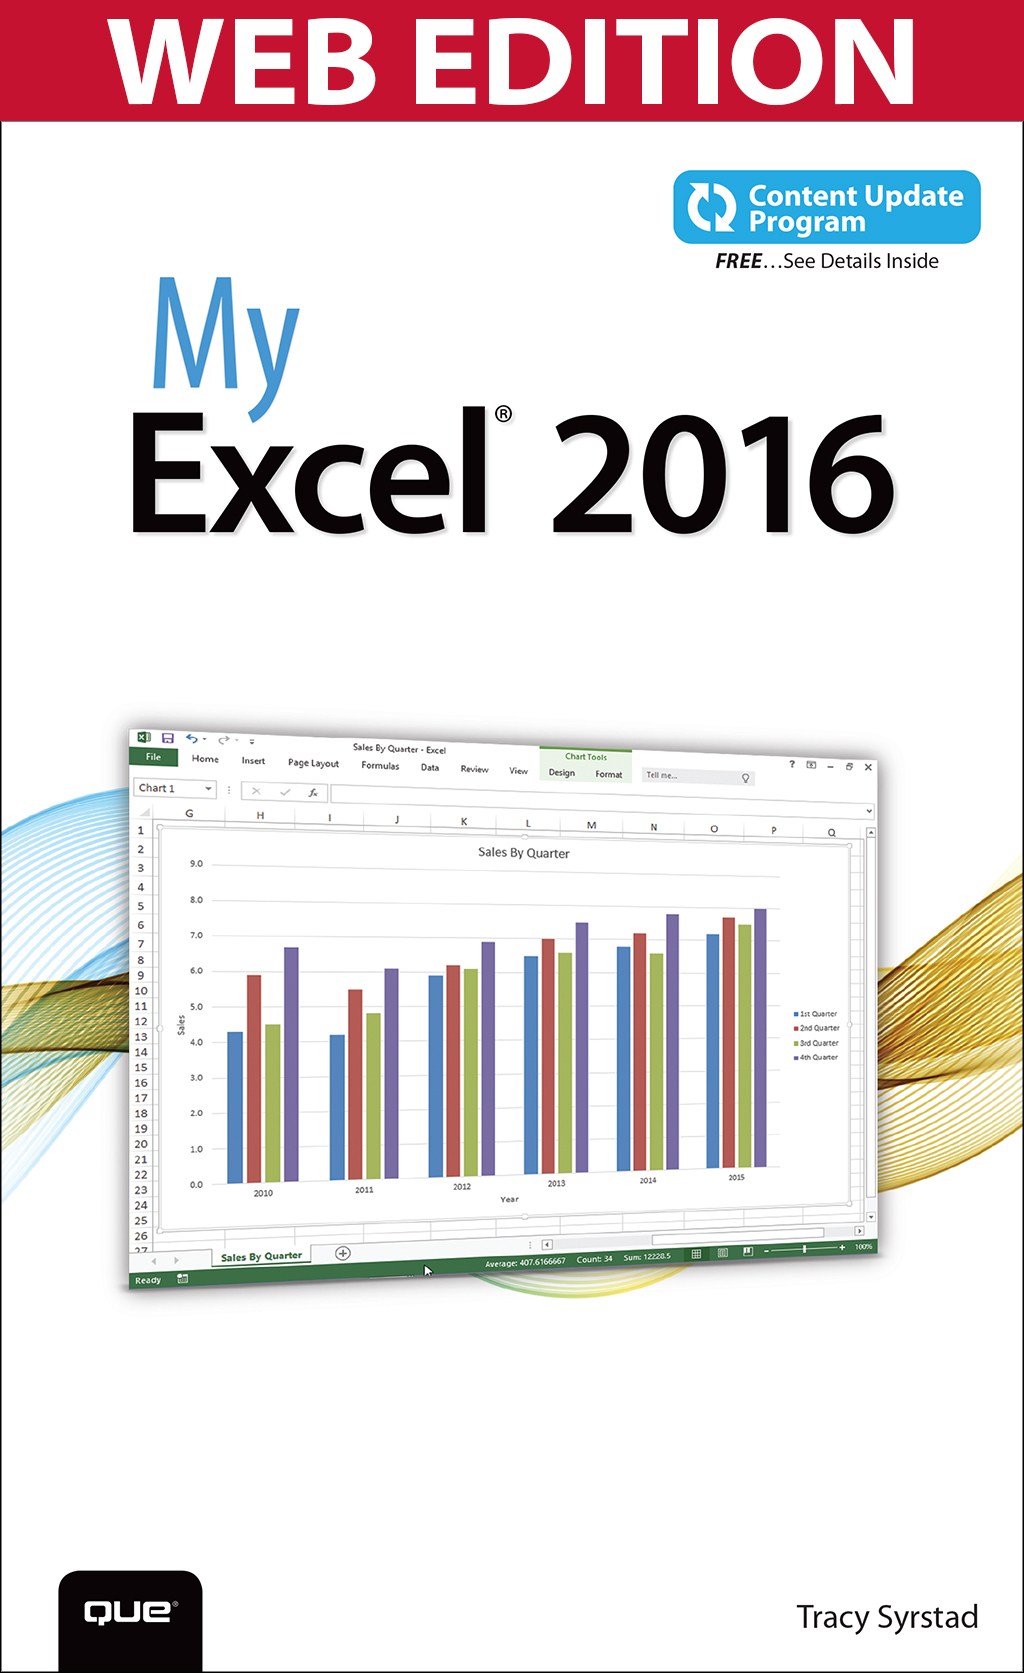 My Excel 2016 (Web Edition with Content Update Program)